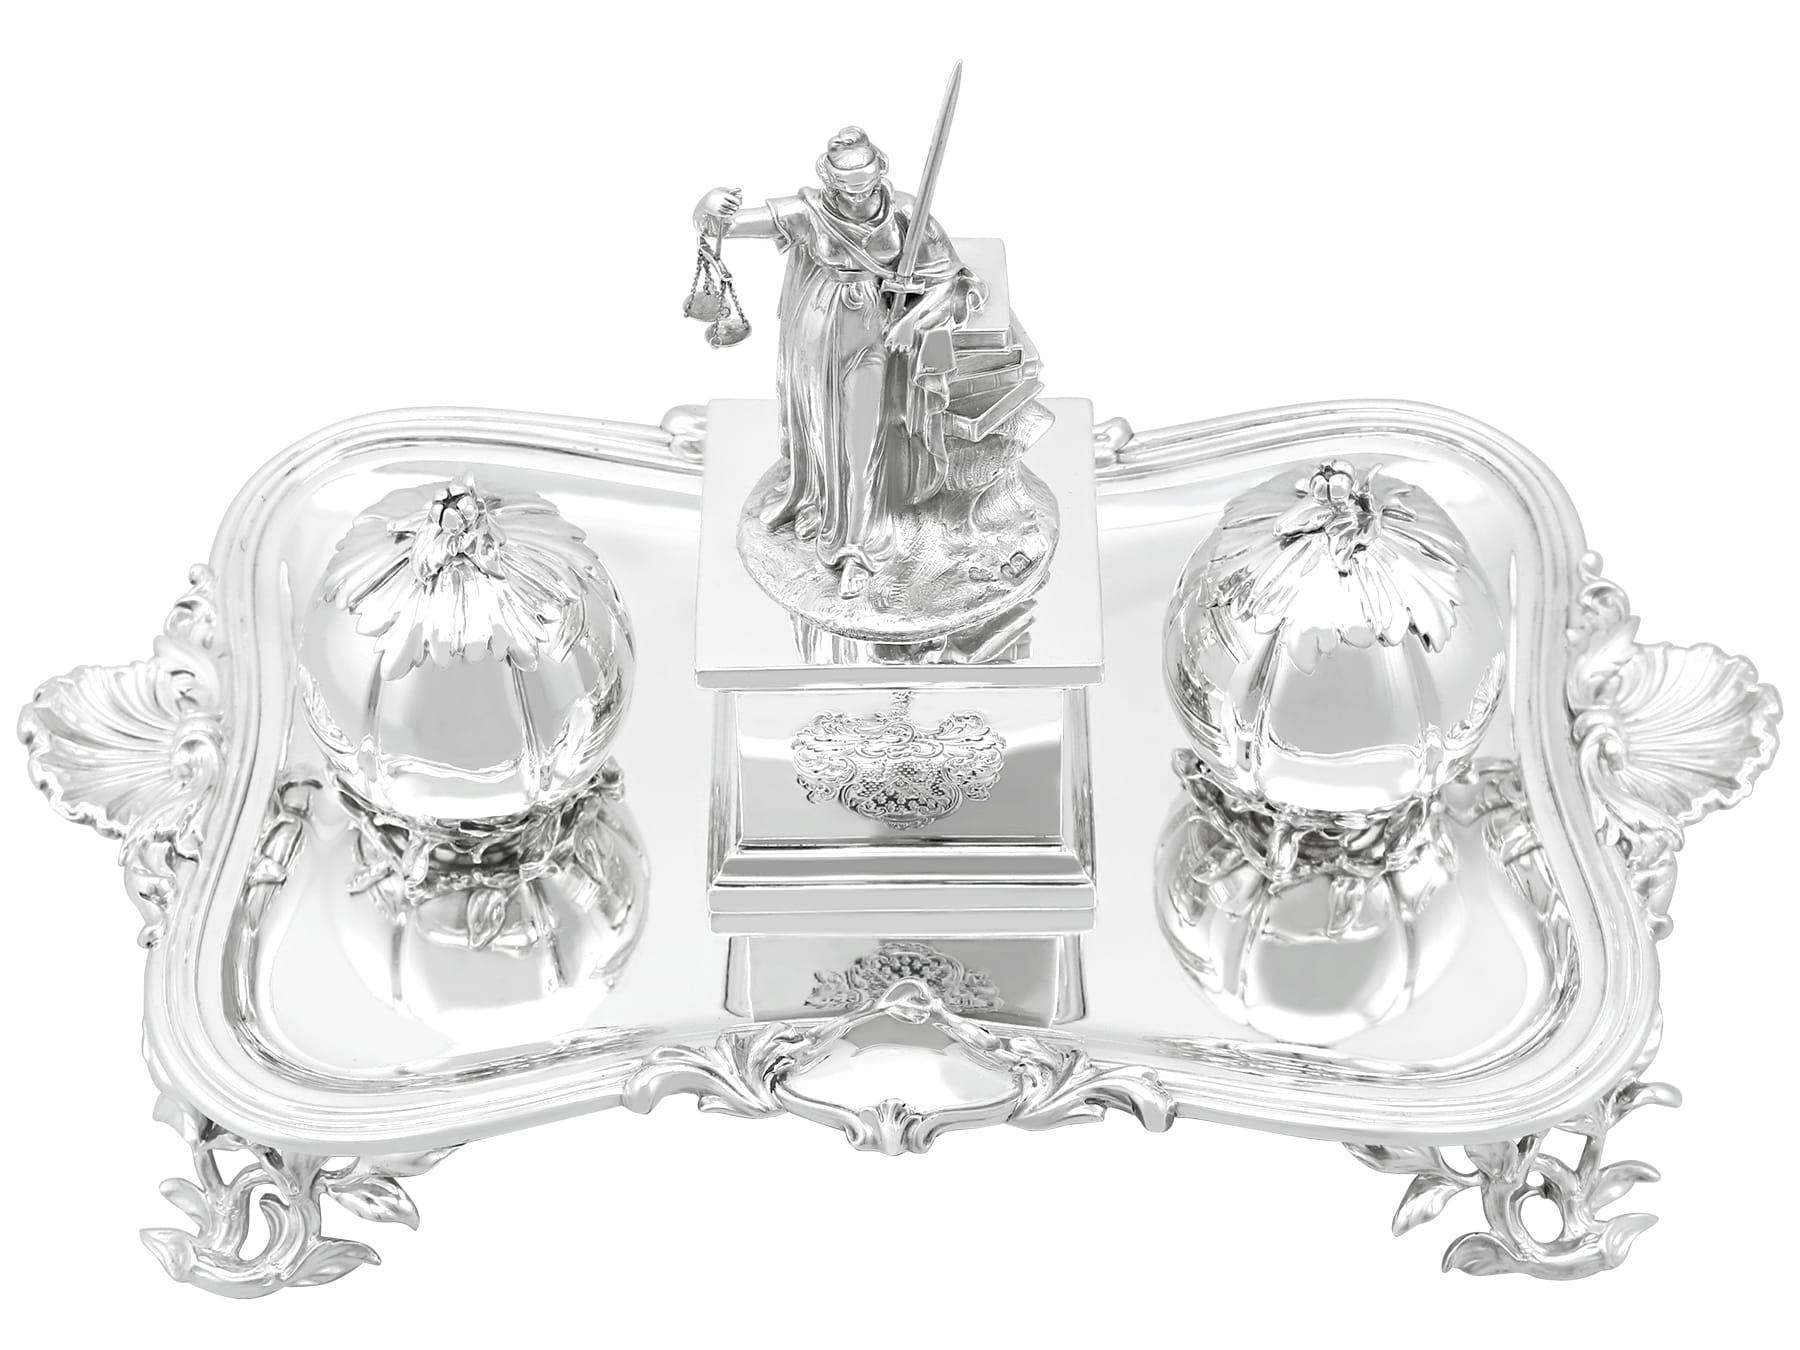 A magnificent, fine and impressive antique Victorian English sterling silver inkstand / desk standish; an addition to our ornamental silverware collection

This magnificent, fine and impressive antique Victorian inkstand in sterling silver has a